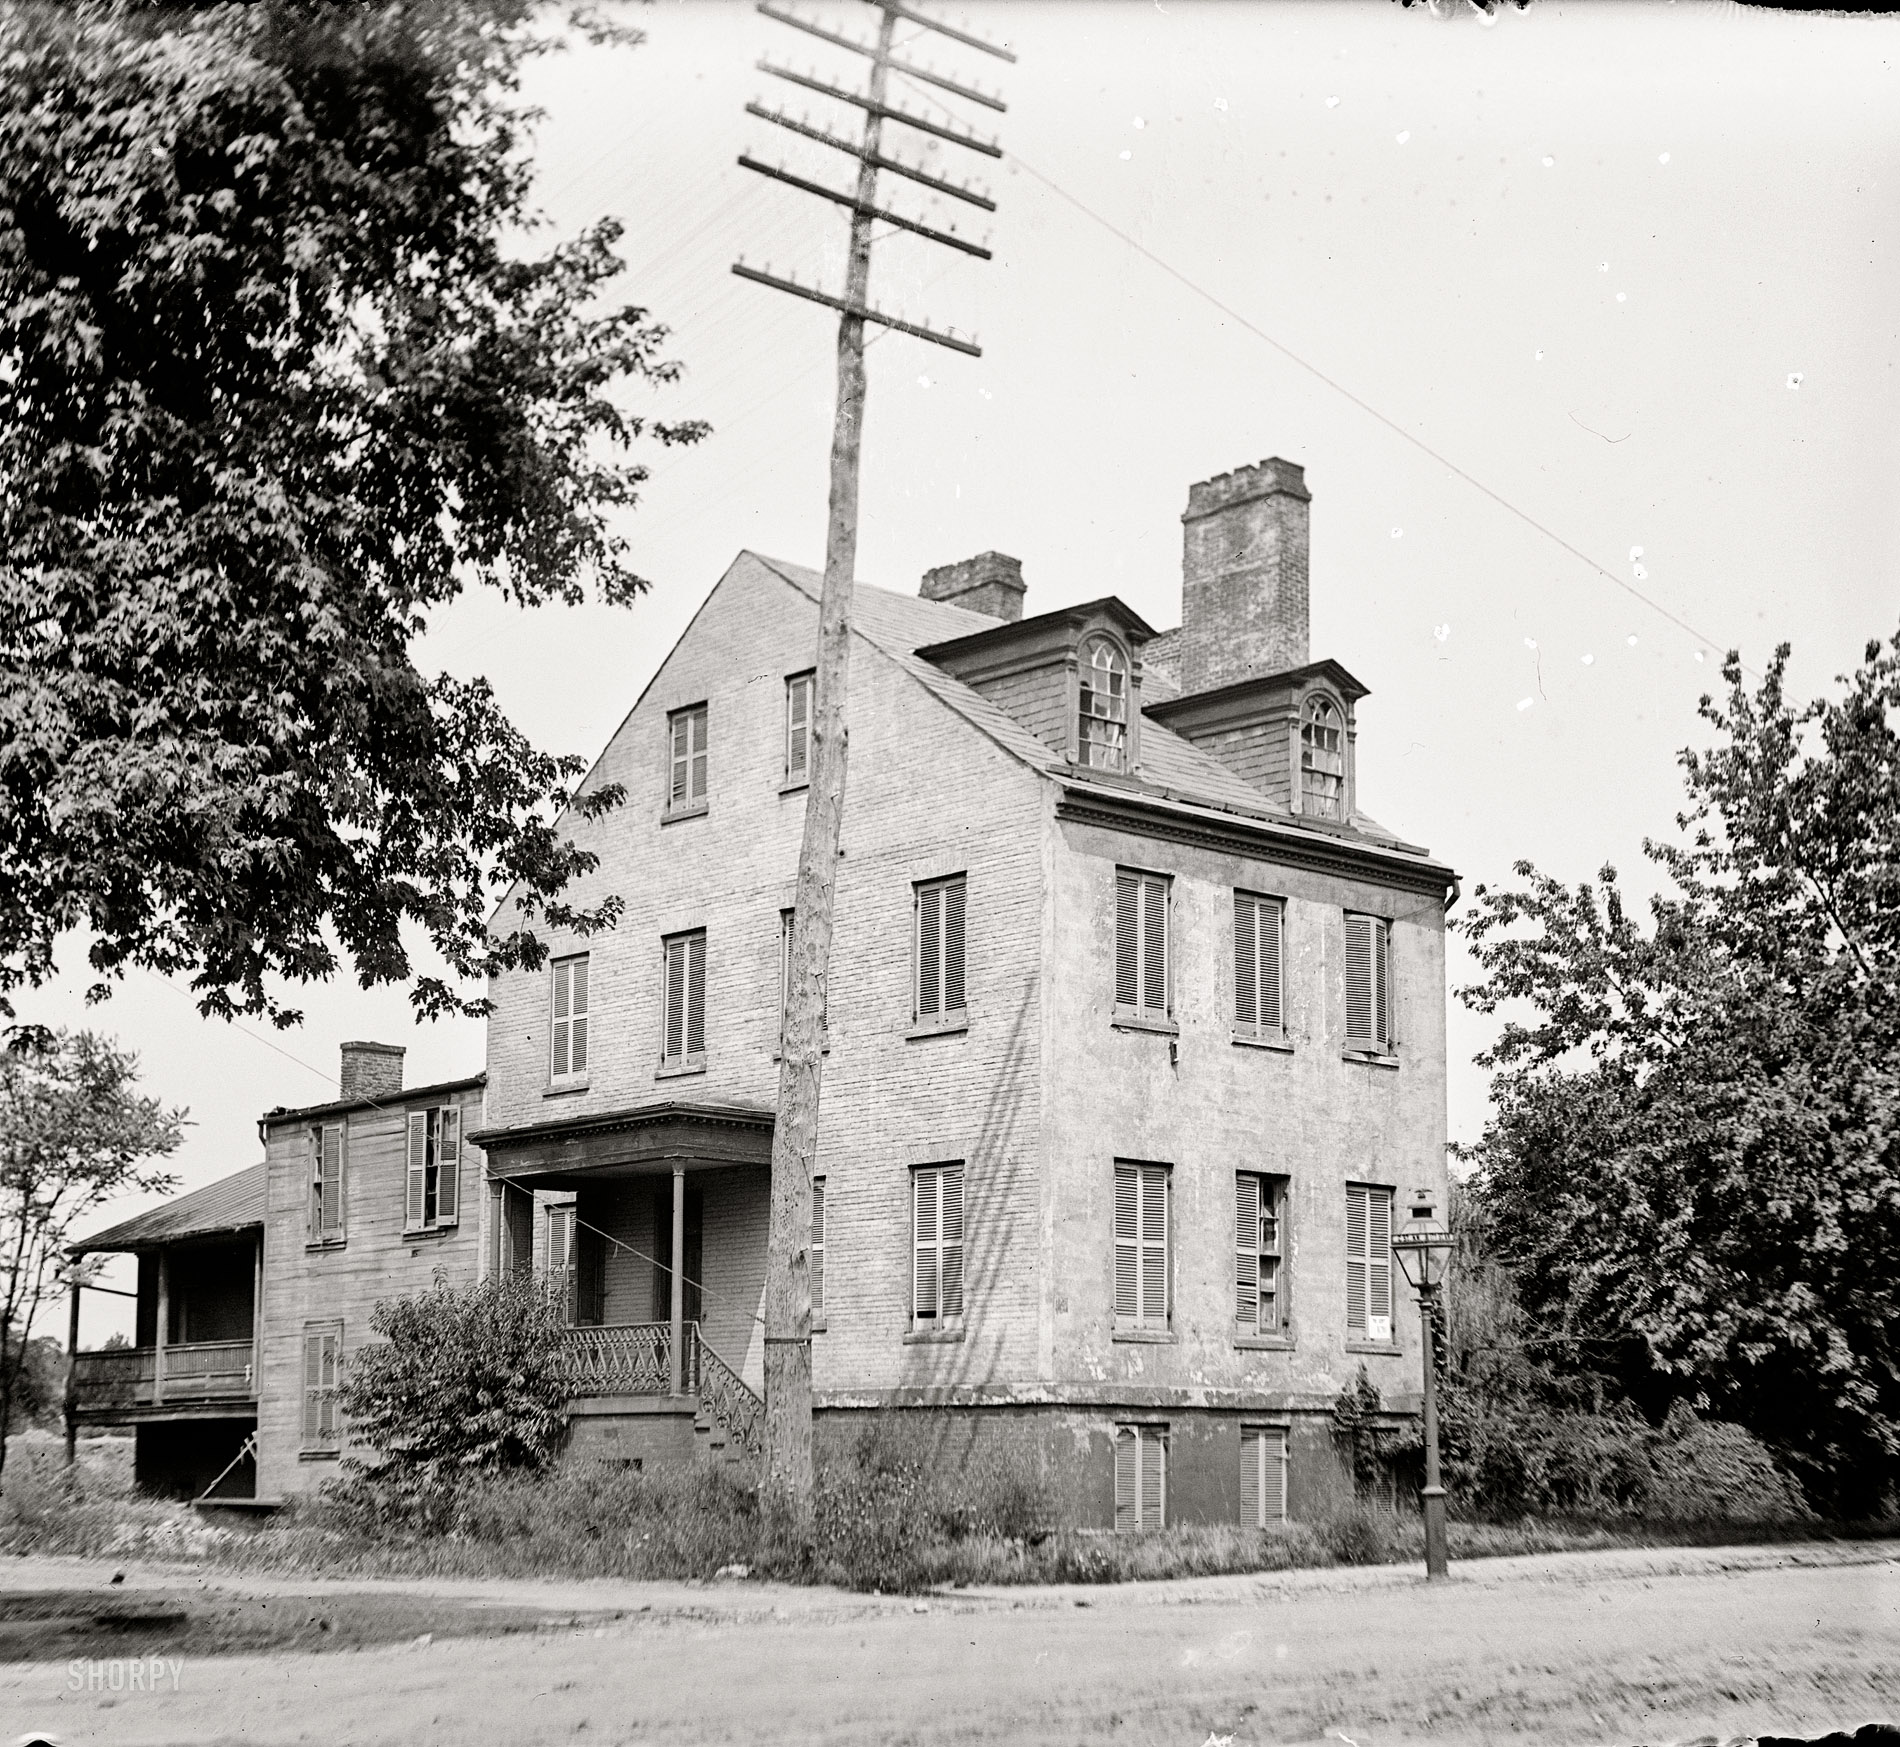 Washington, D.C., circa 1901. "Carberry [Carbery] Mansion." Built for Thomas Carbery in 1818 at 17th and C Streets N.W. National Photo Co. View full size.